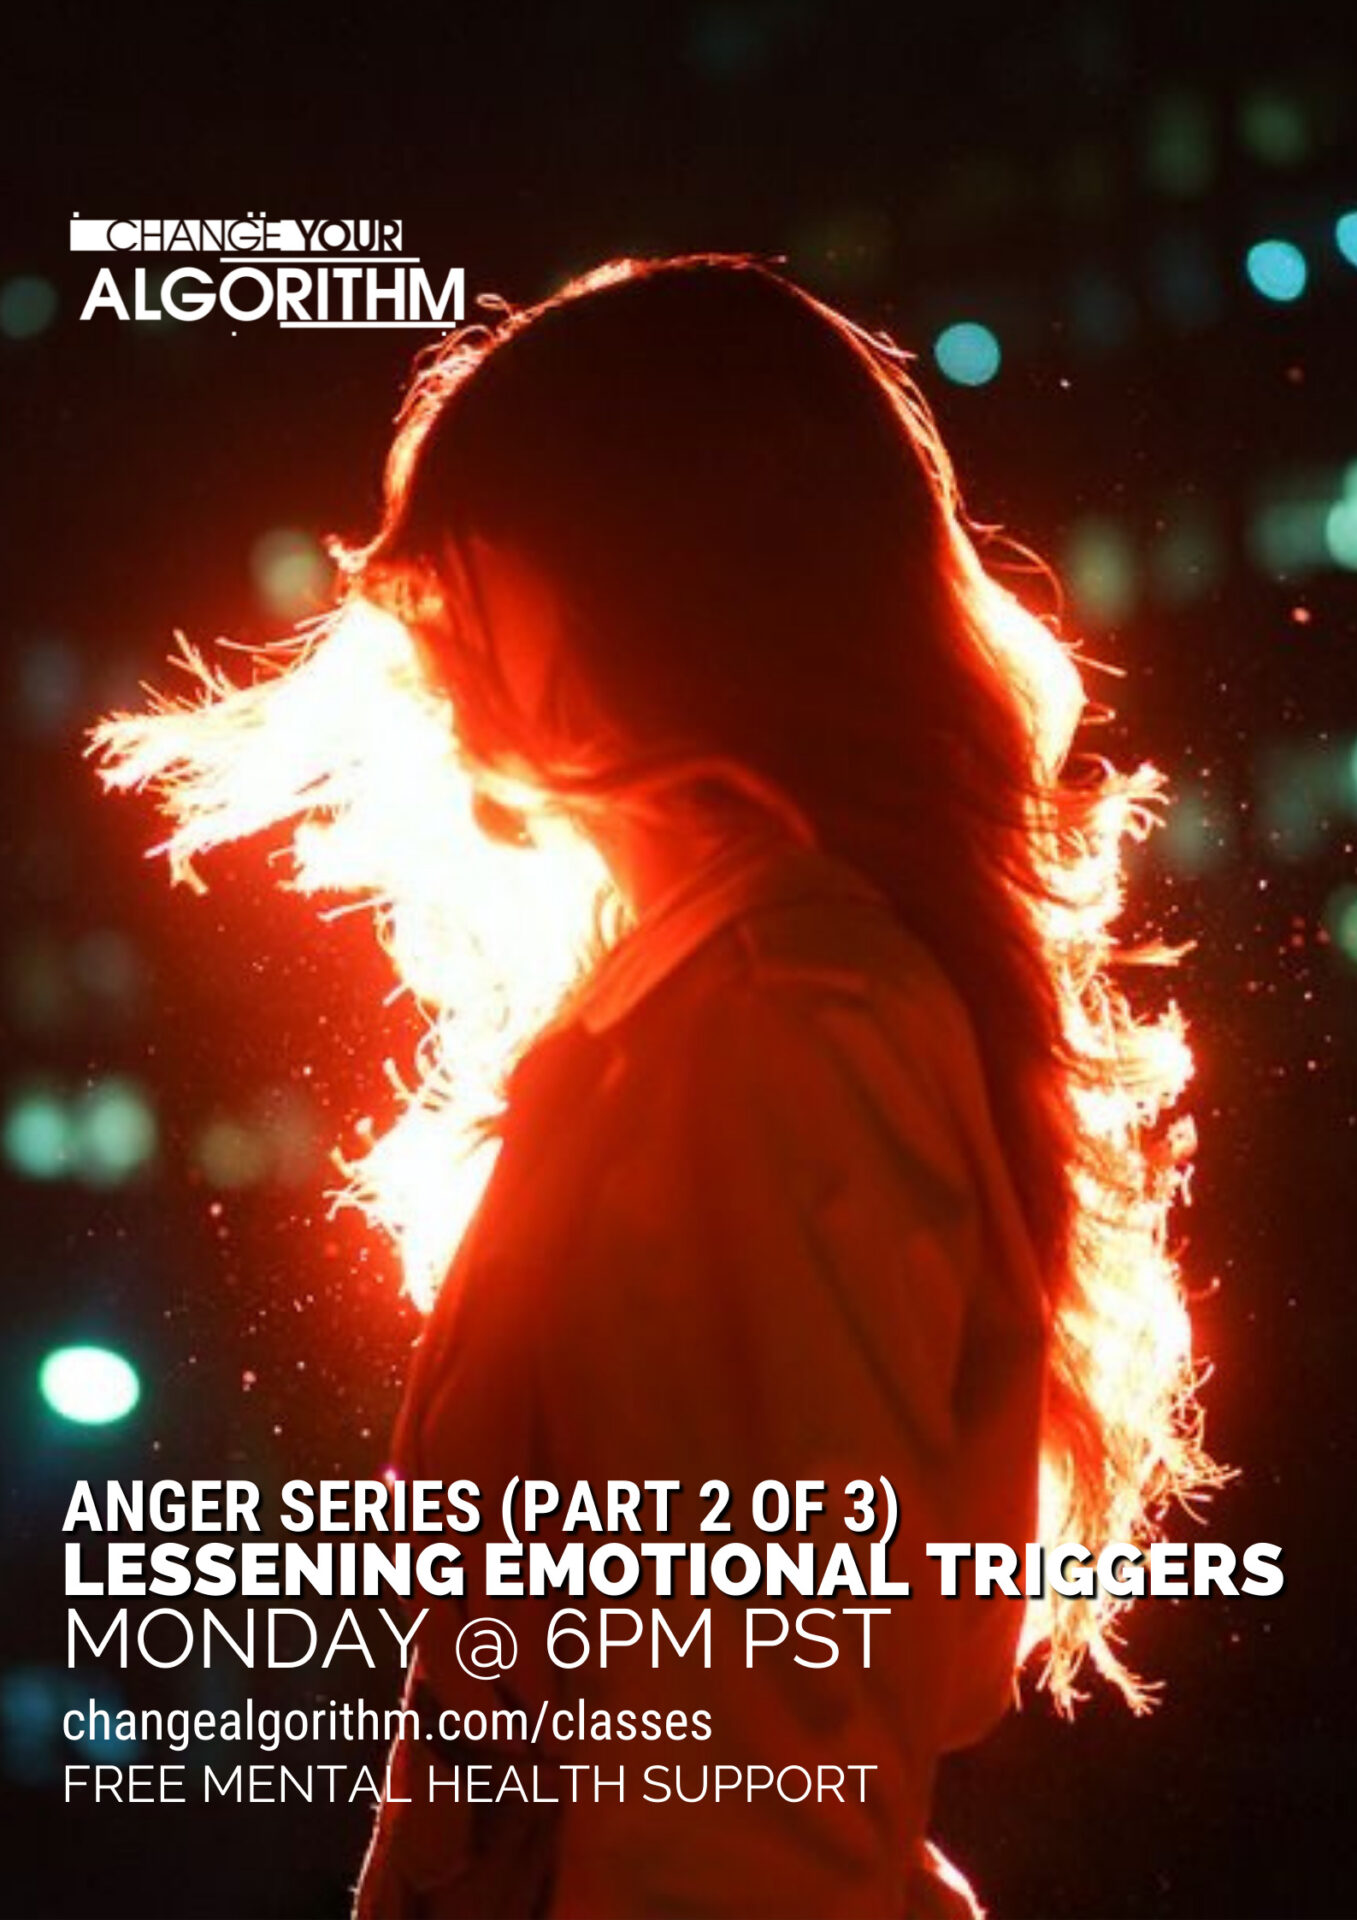 Anger Series (Part 2 of 3): Lessening Emotional Triggers